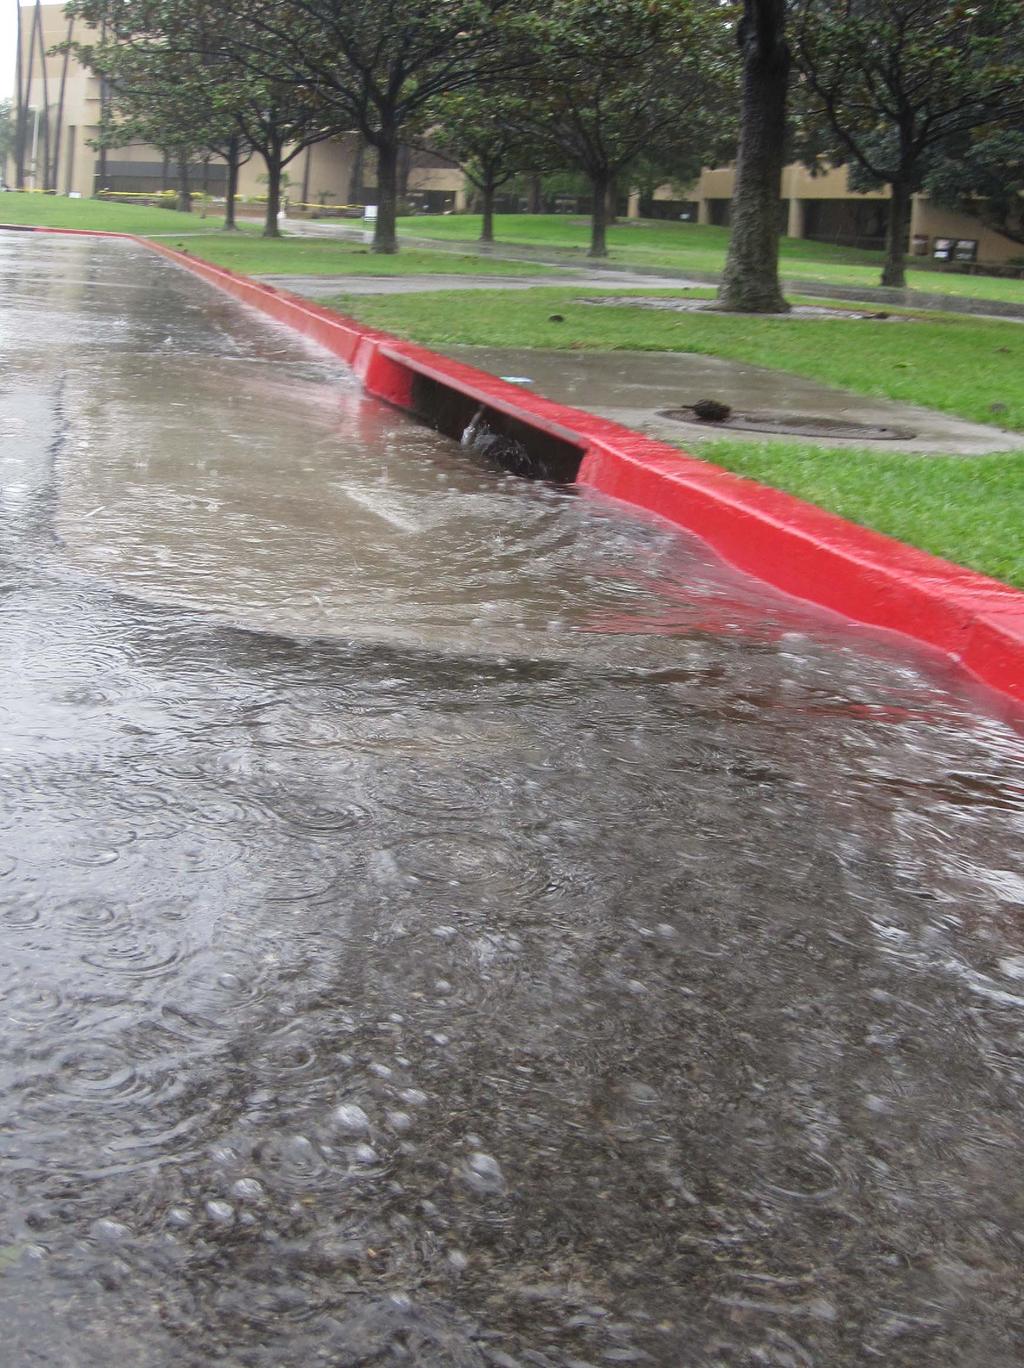 The dirtiest stormwater occurs after pollutants have accumulated over the dry period.